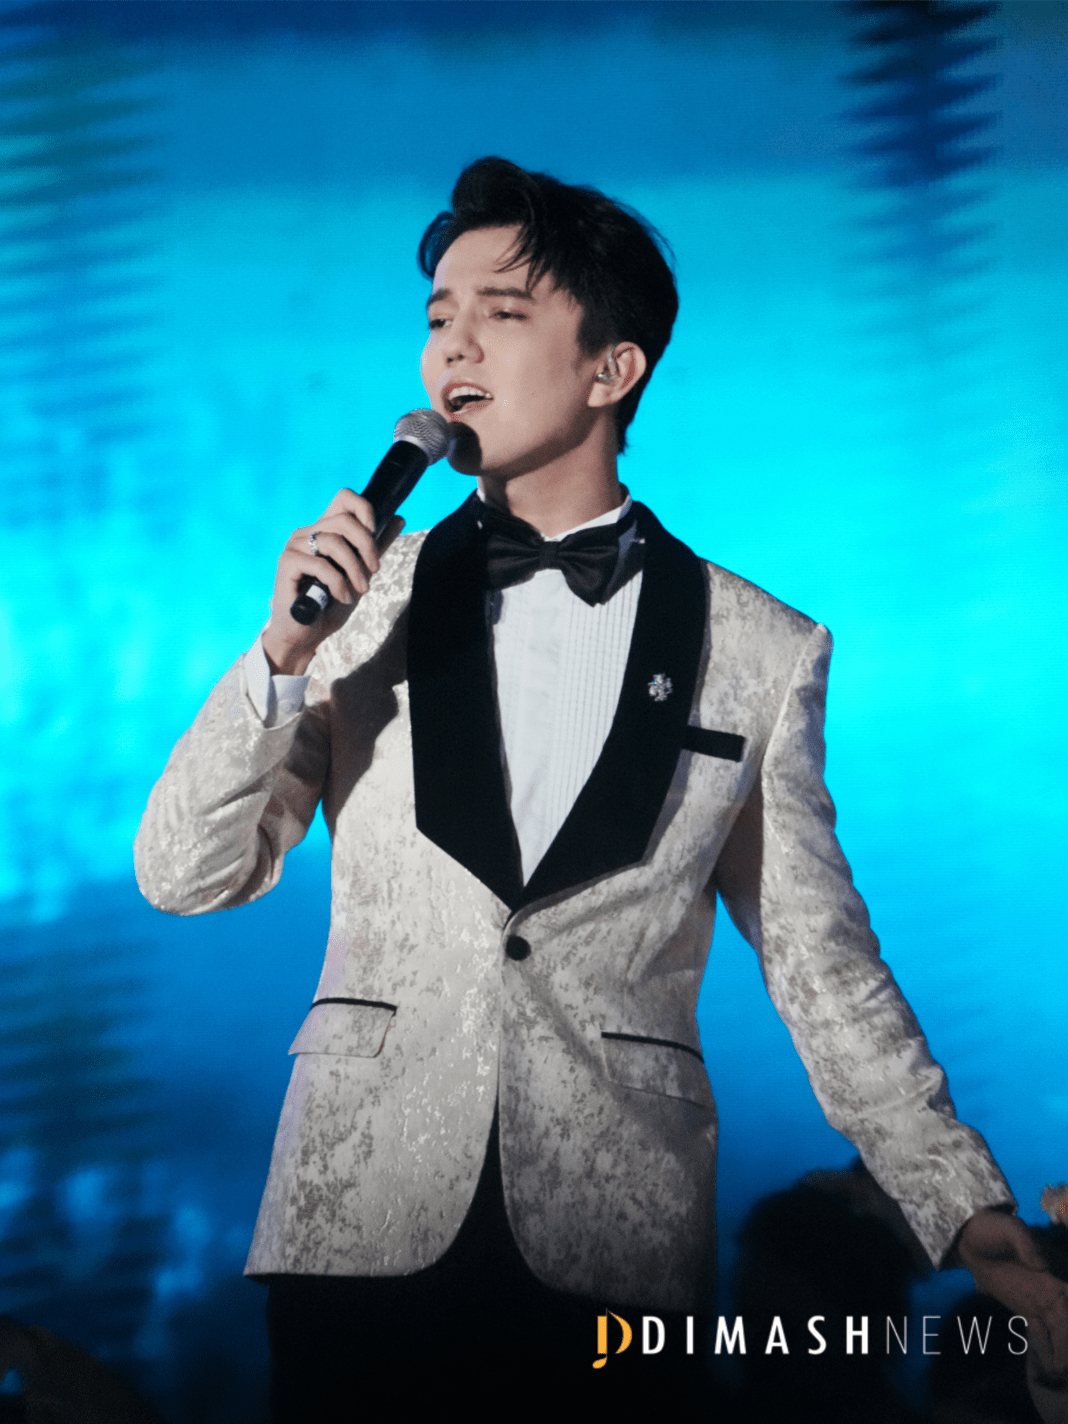 Dimash performed at the closing of the 10th Silk Road International Film Festival